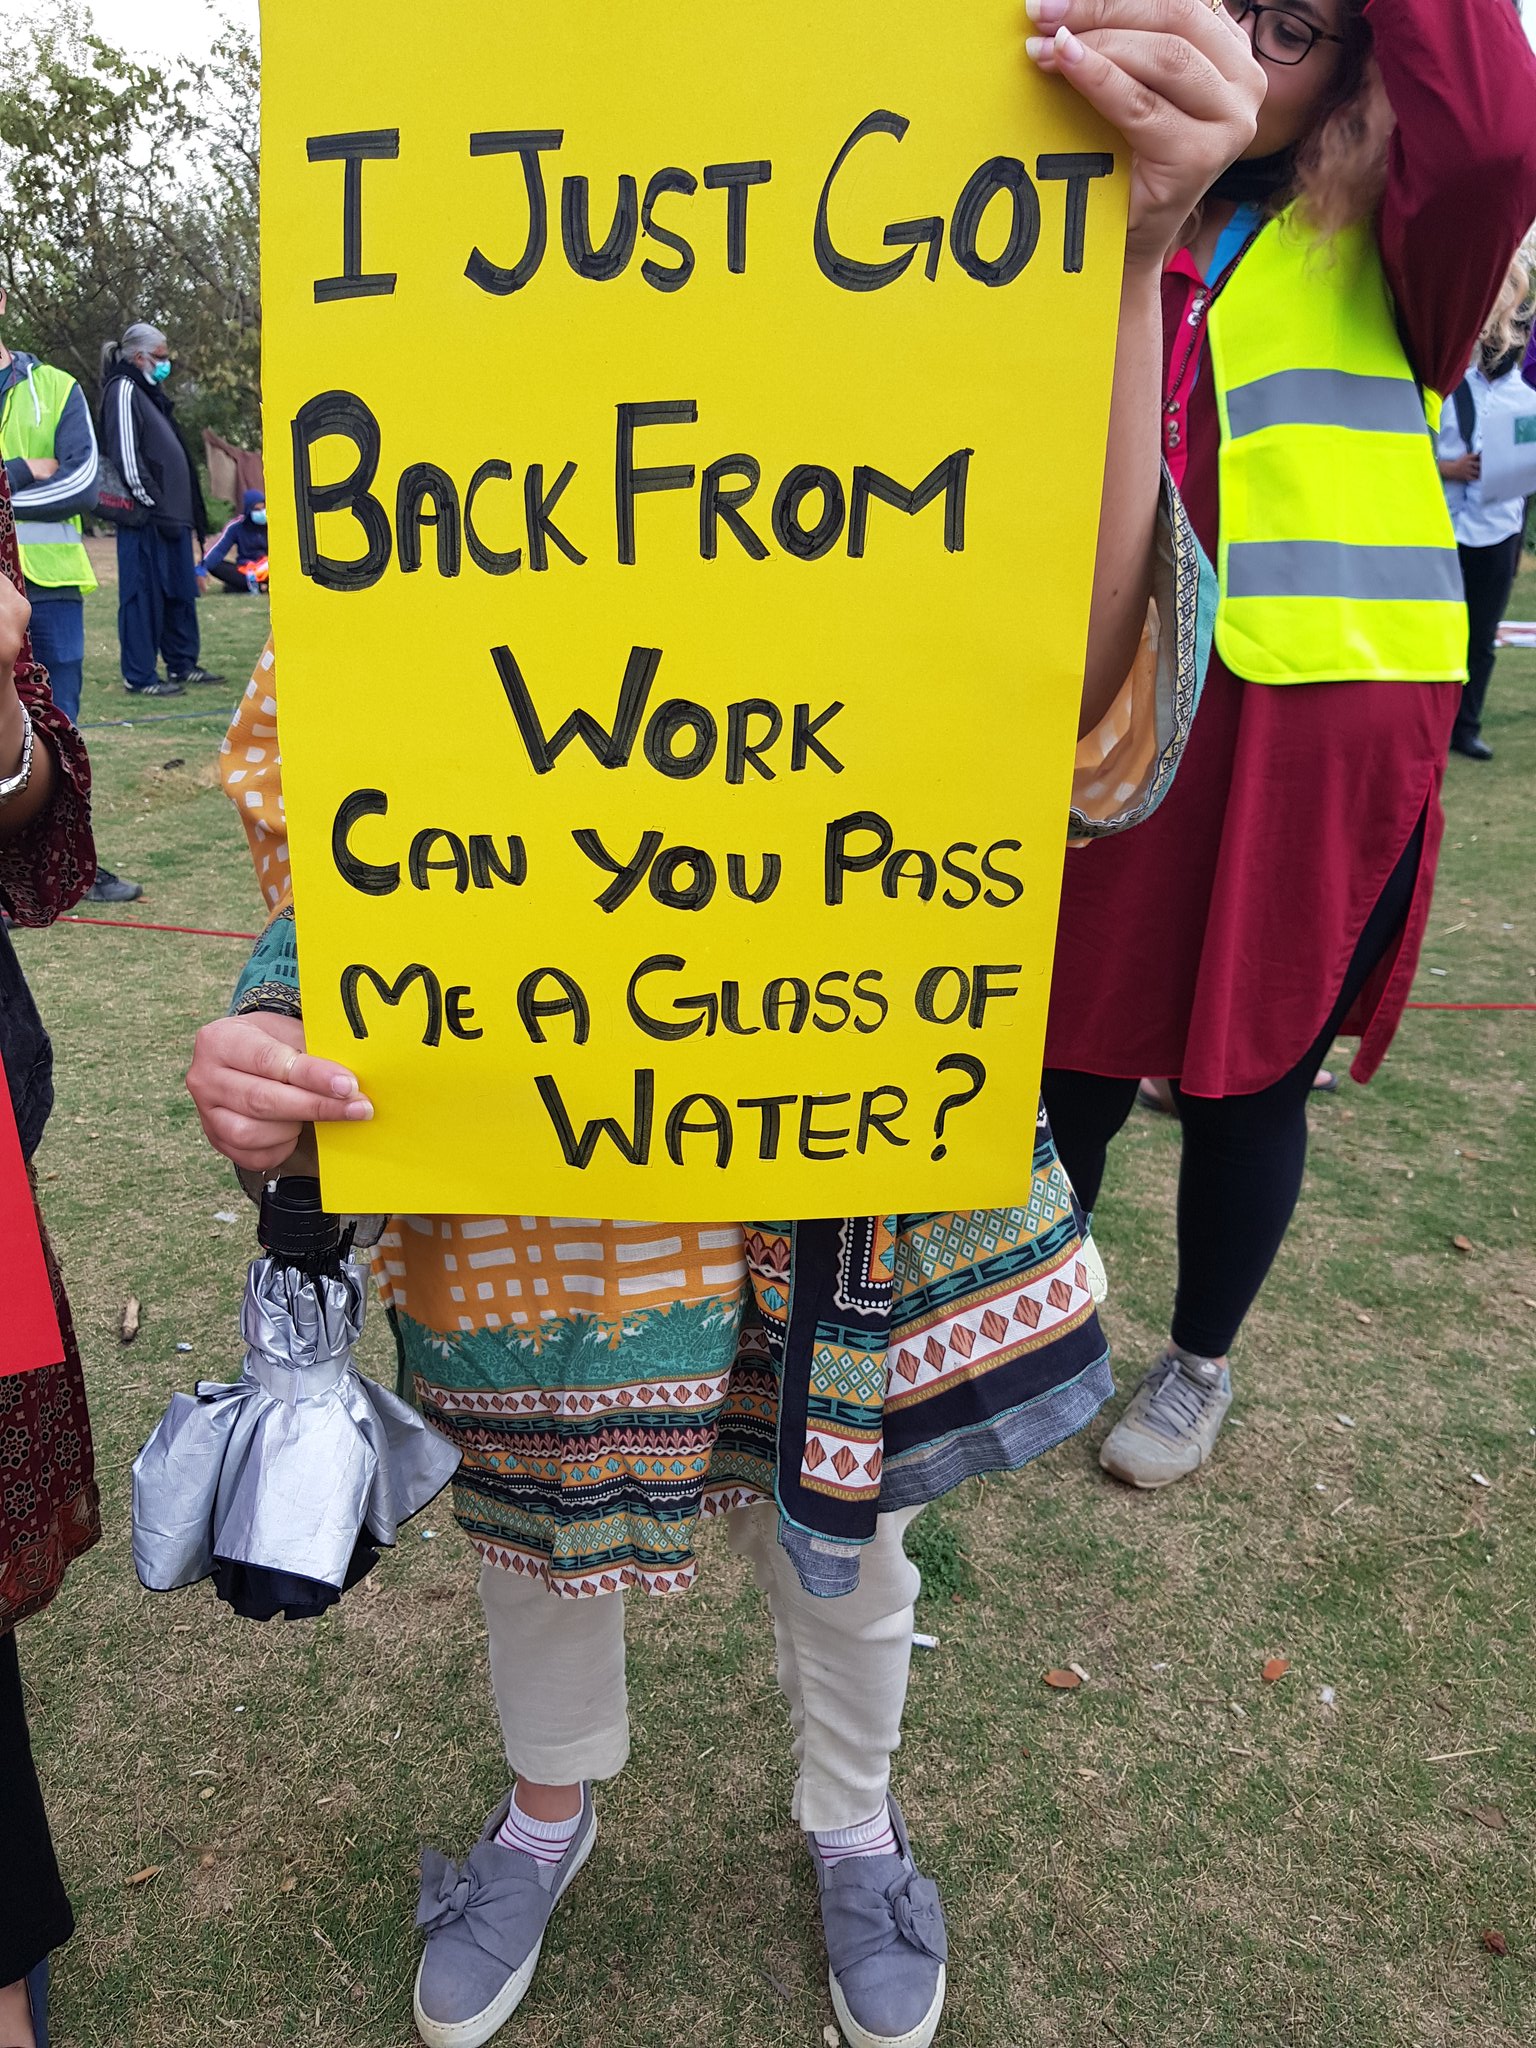 Best Slogans from Aurat March 2021 - Pictures Inside!